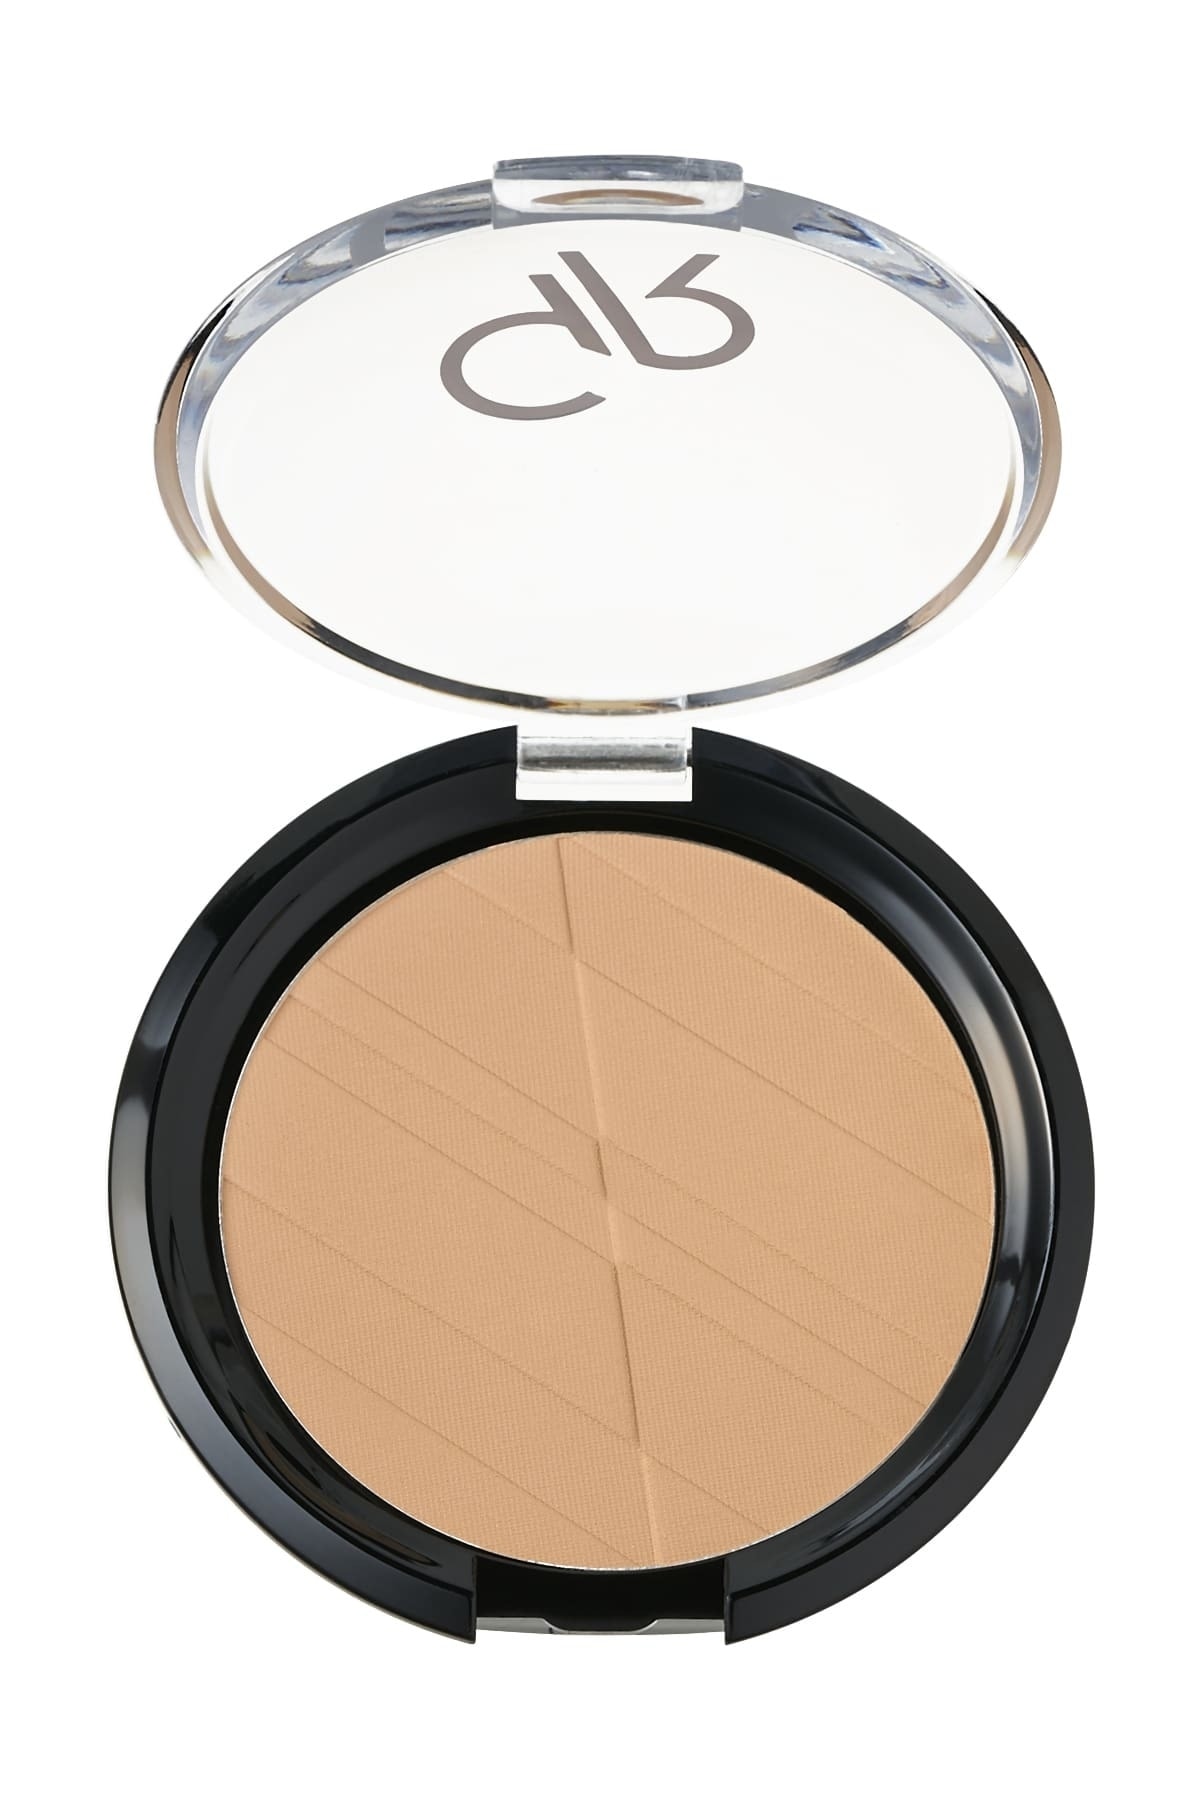 Golden Rose Pudra - Silky Touch Compact Powder No: 08 8691190115081